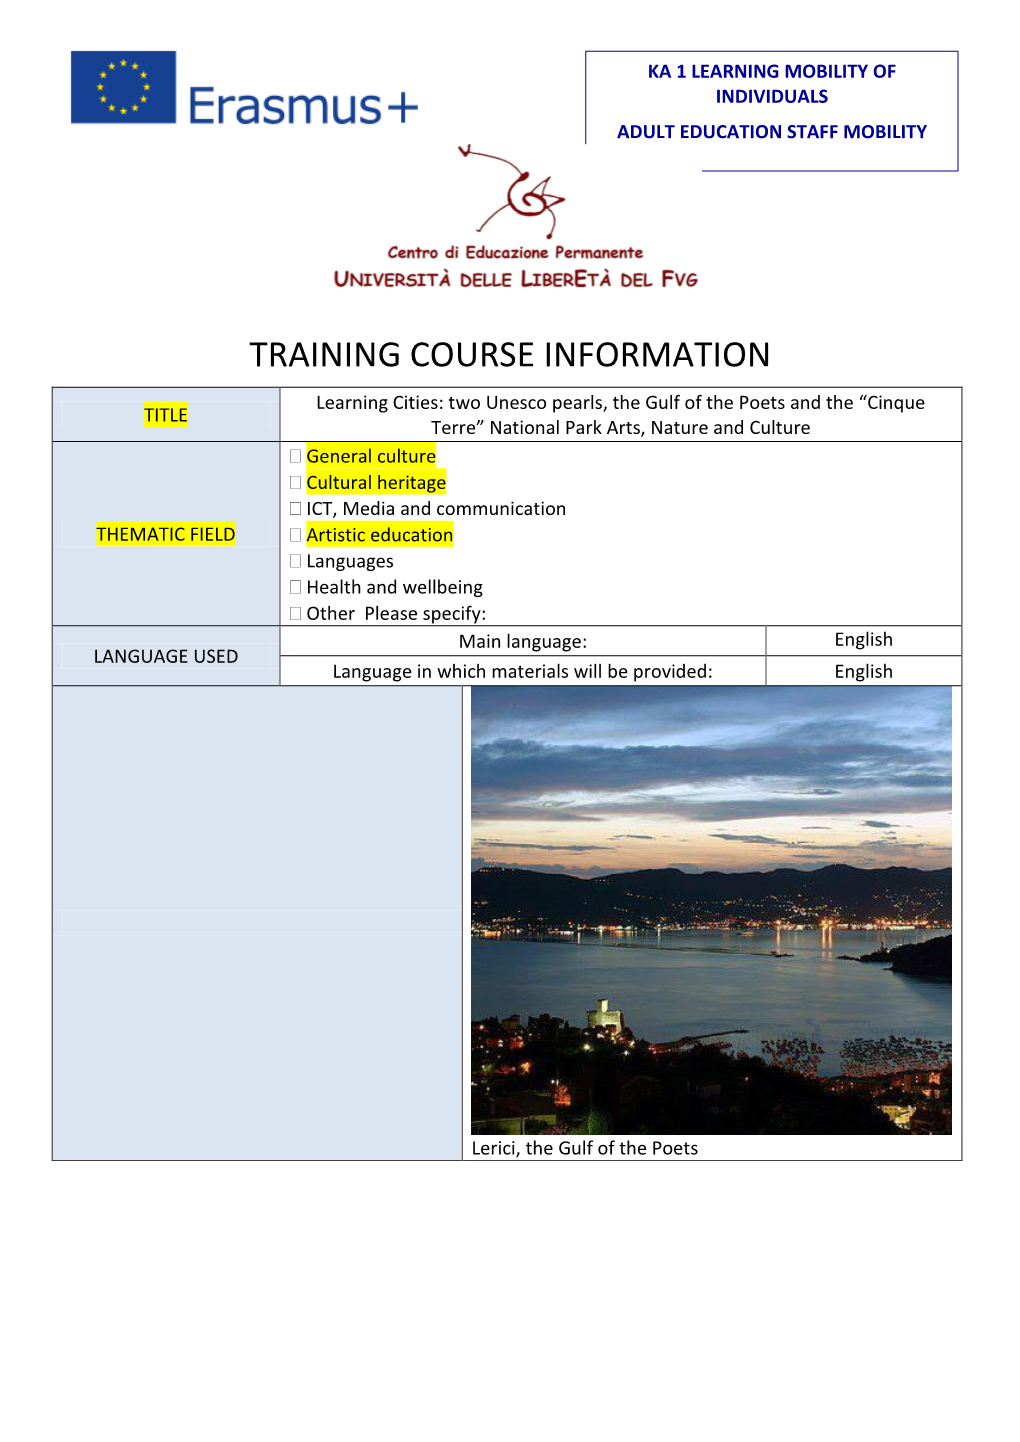 Training Course Information